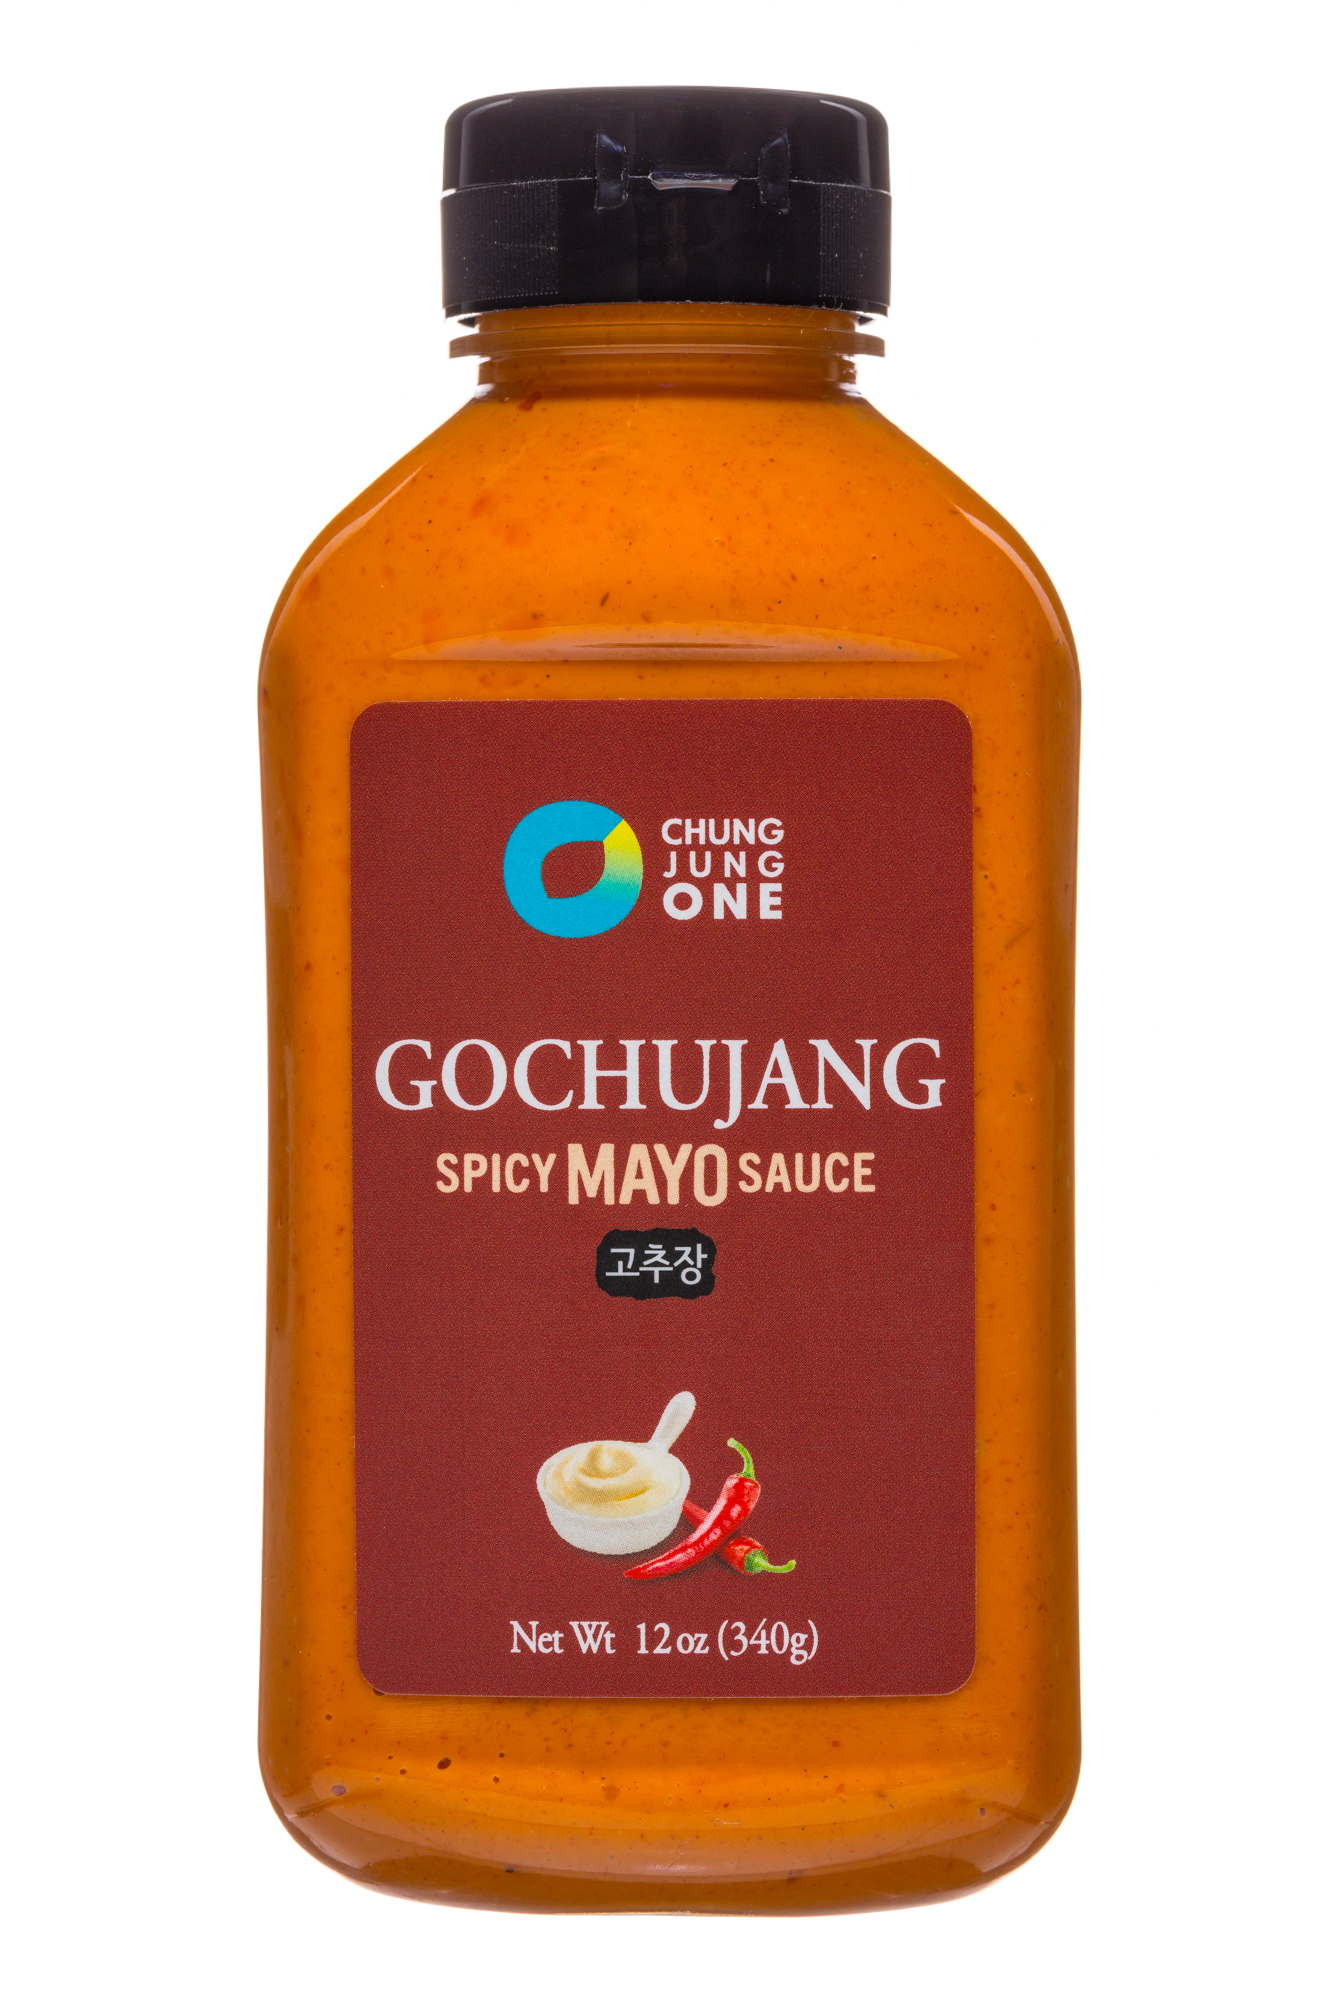 Spicy Mayo Sauce